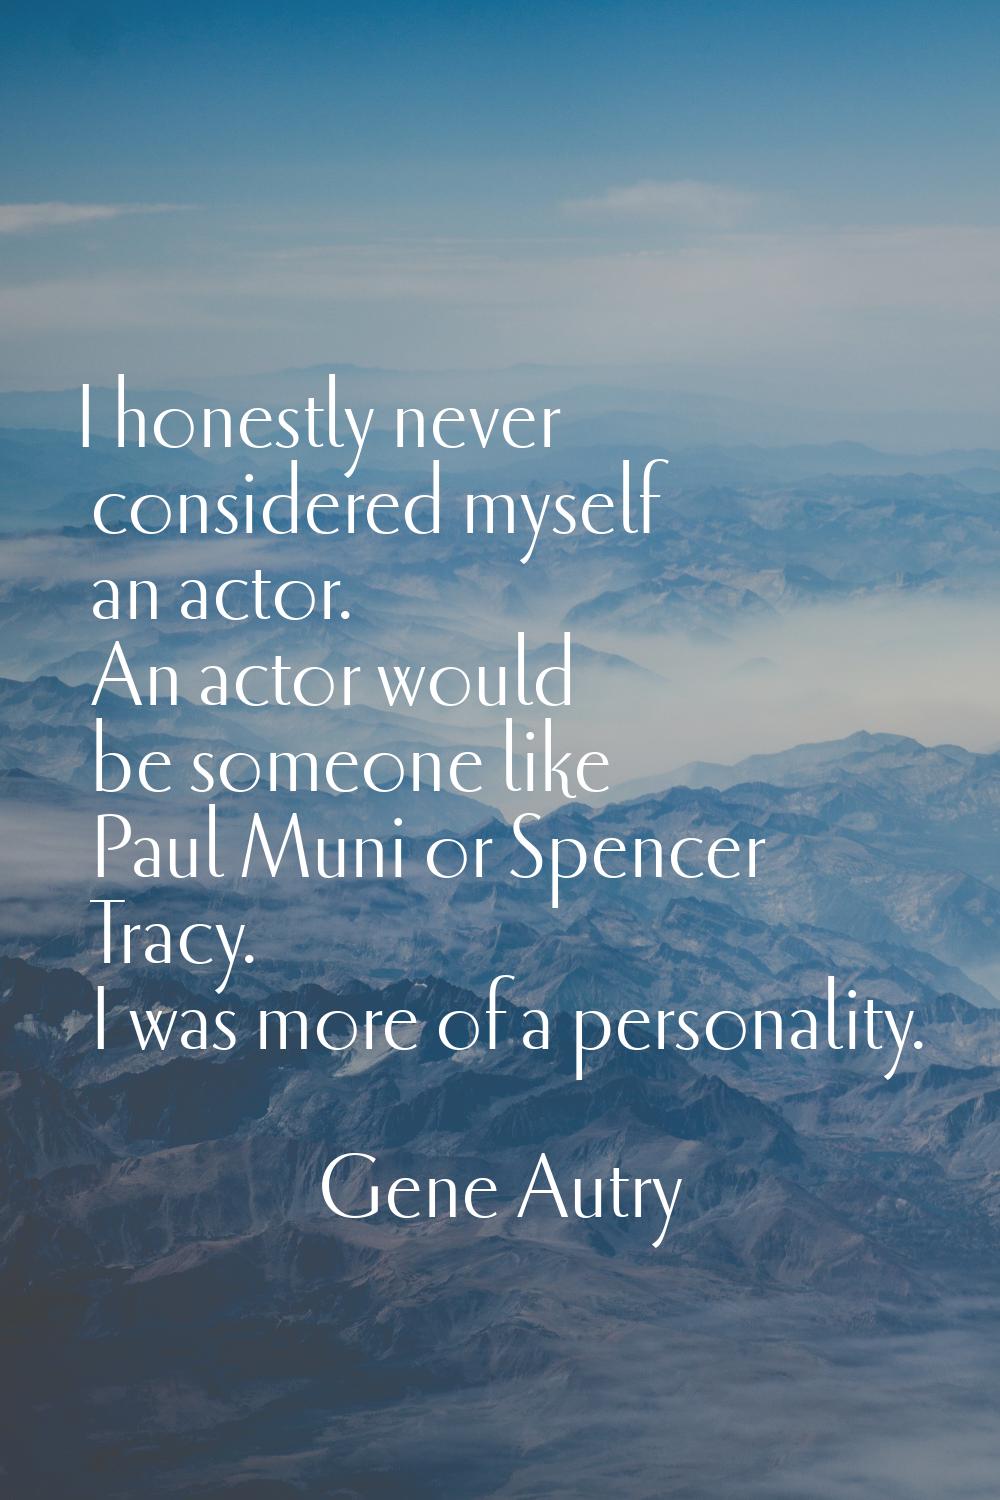 I honestly never considered myself an actor. An actor would be someone like Paul Muni or Spencer Tr